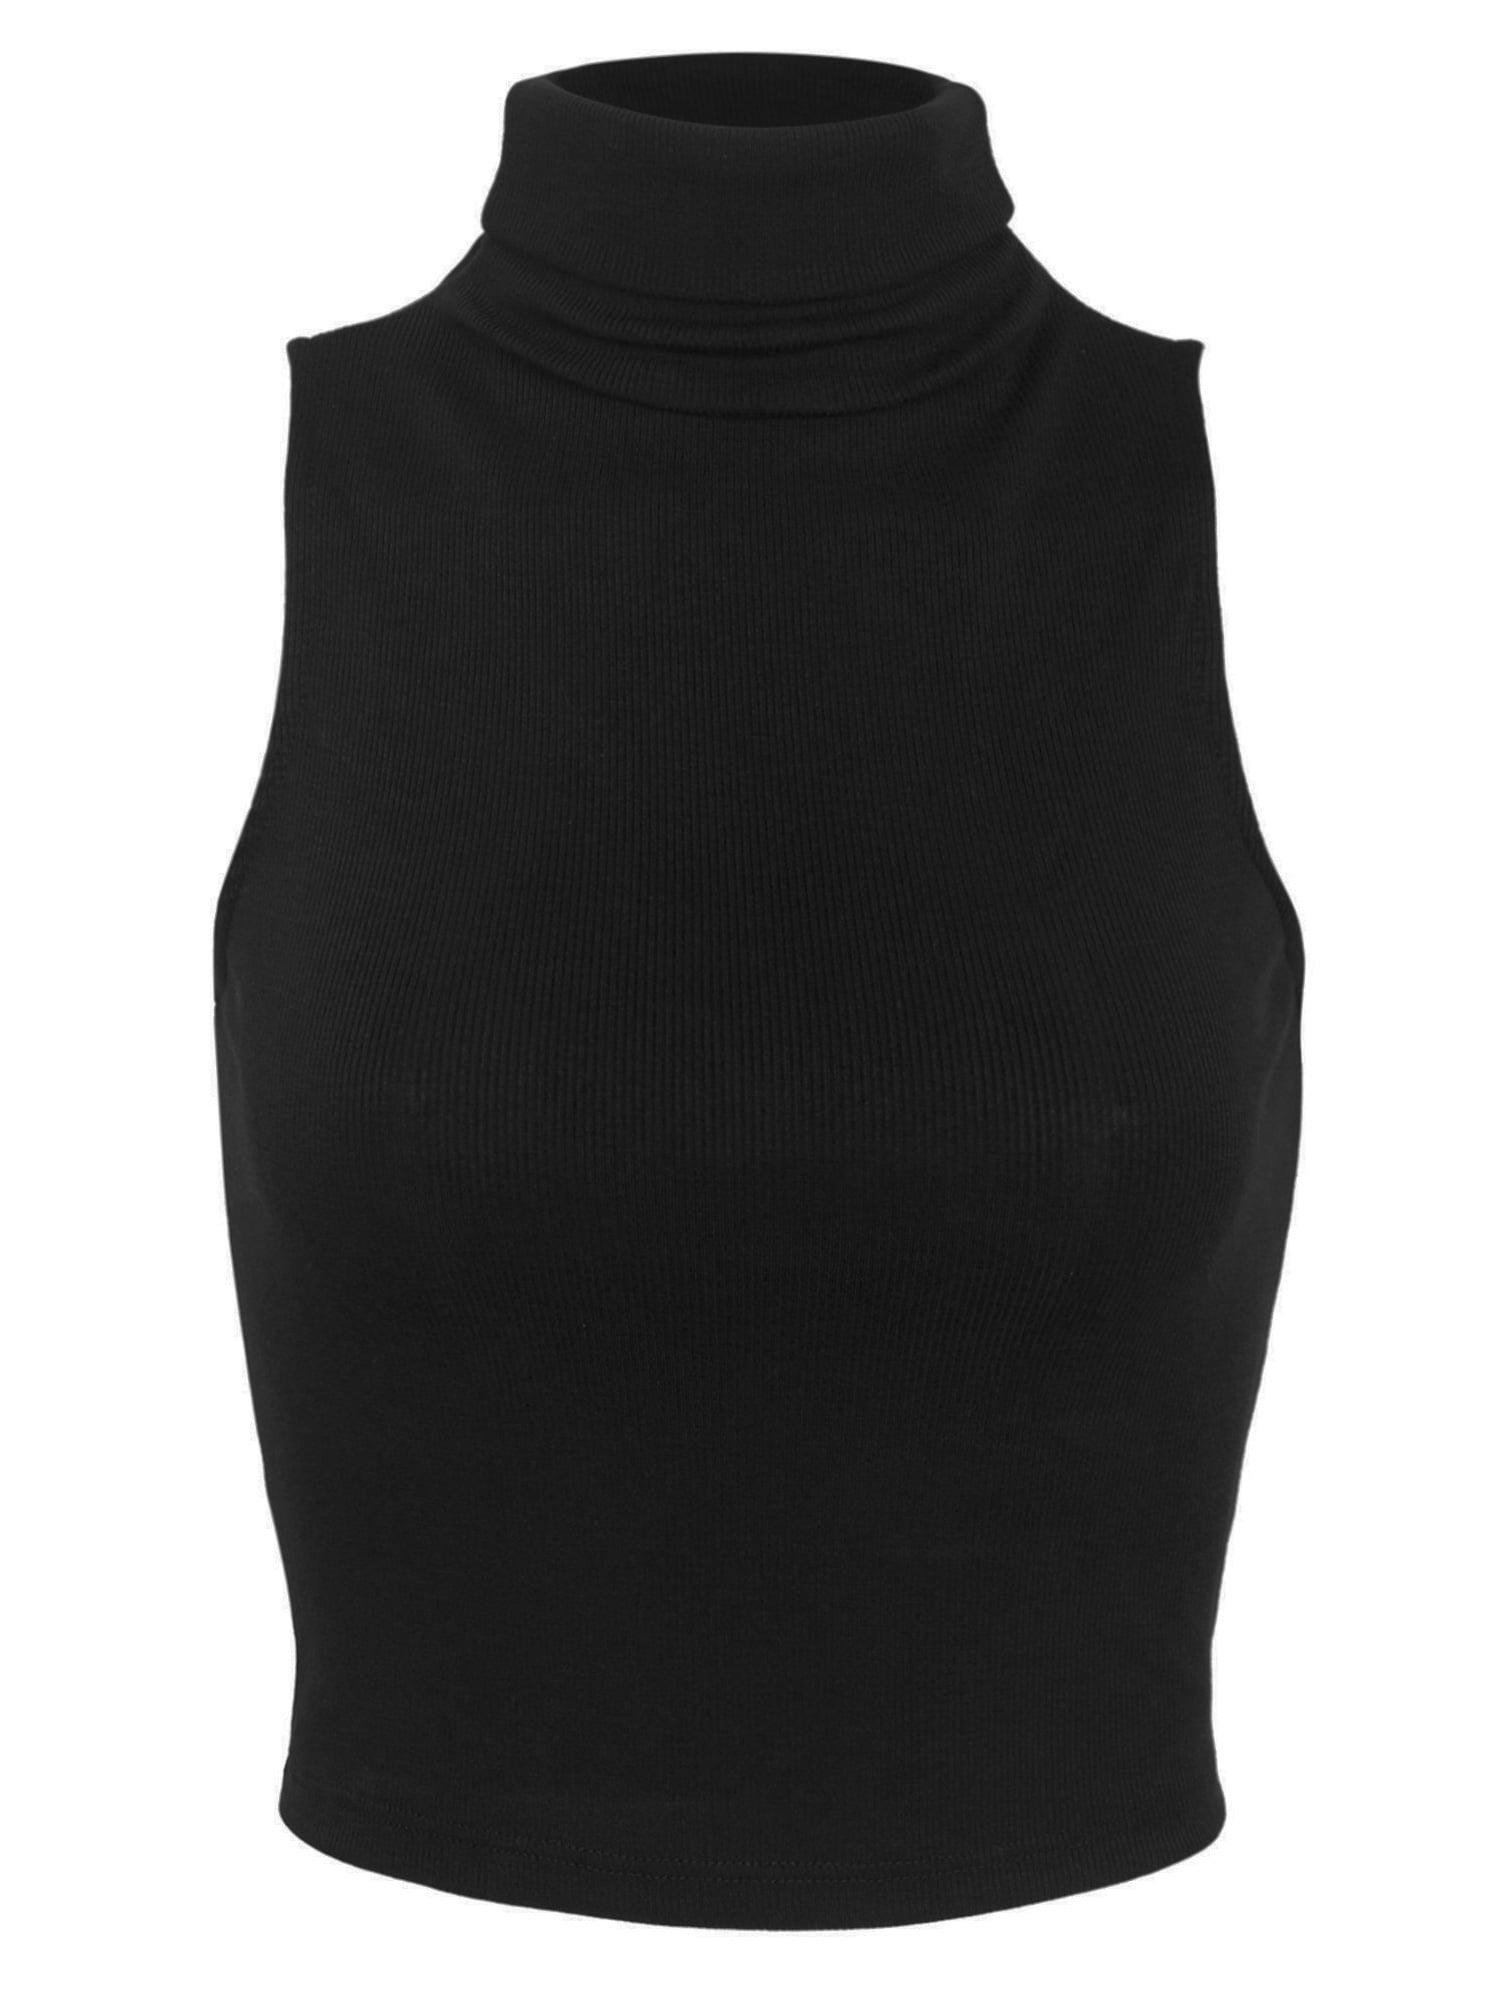 Womens Sleeveless Ribbed Turtleneck Crop Top Knit Made in USA - Walmart.com